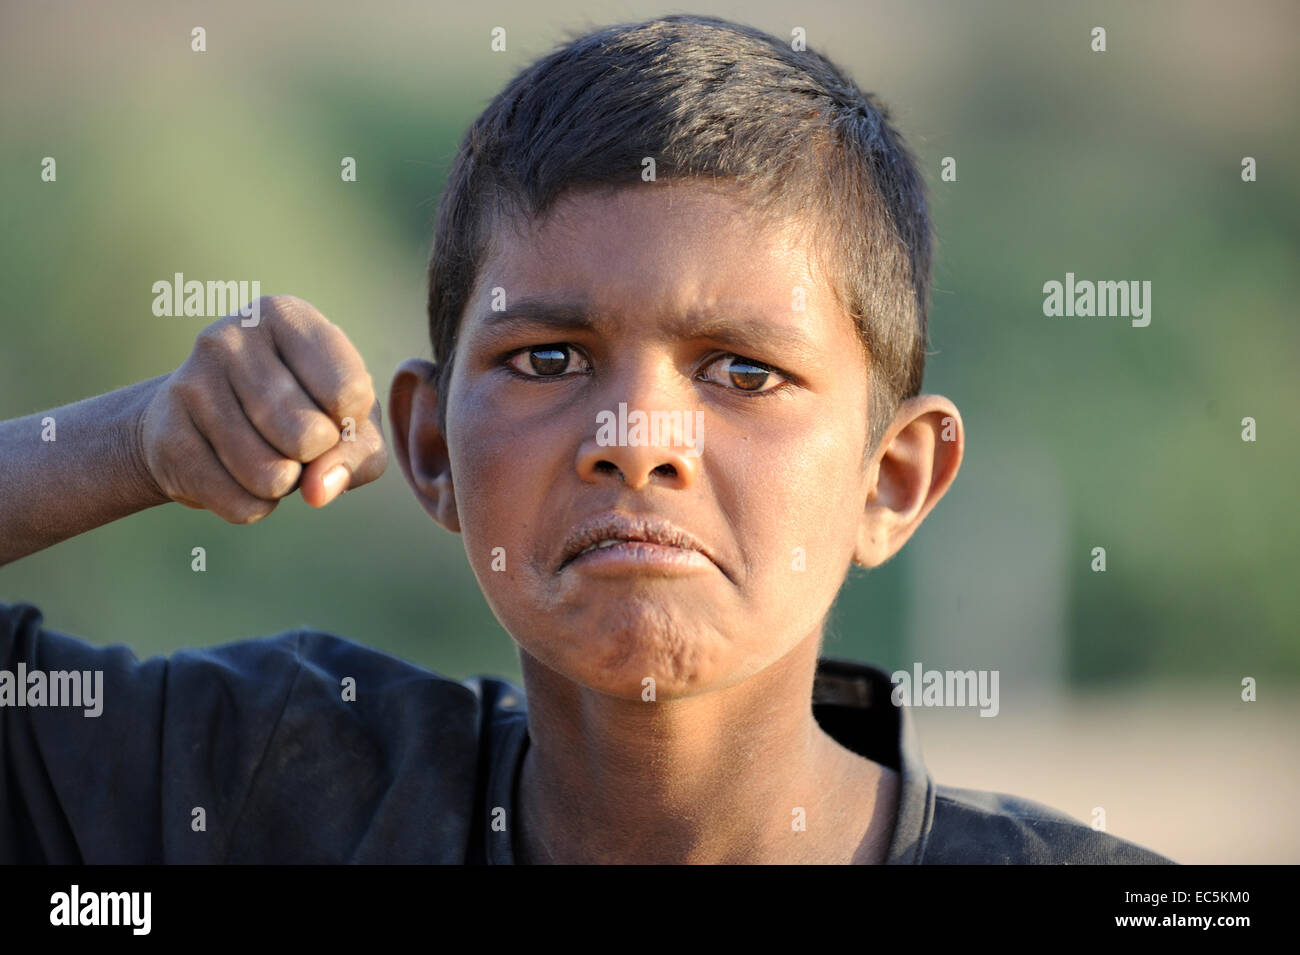 Funny indian boy give punch Stock Photo - Alamy